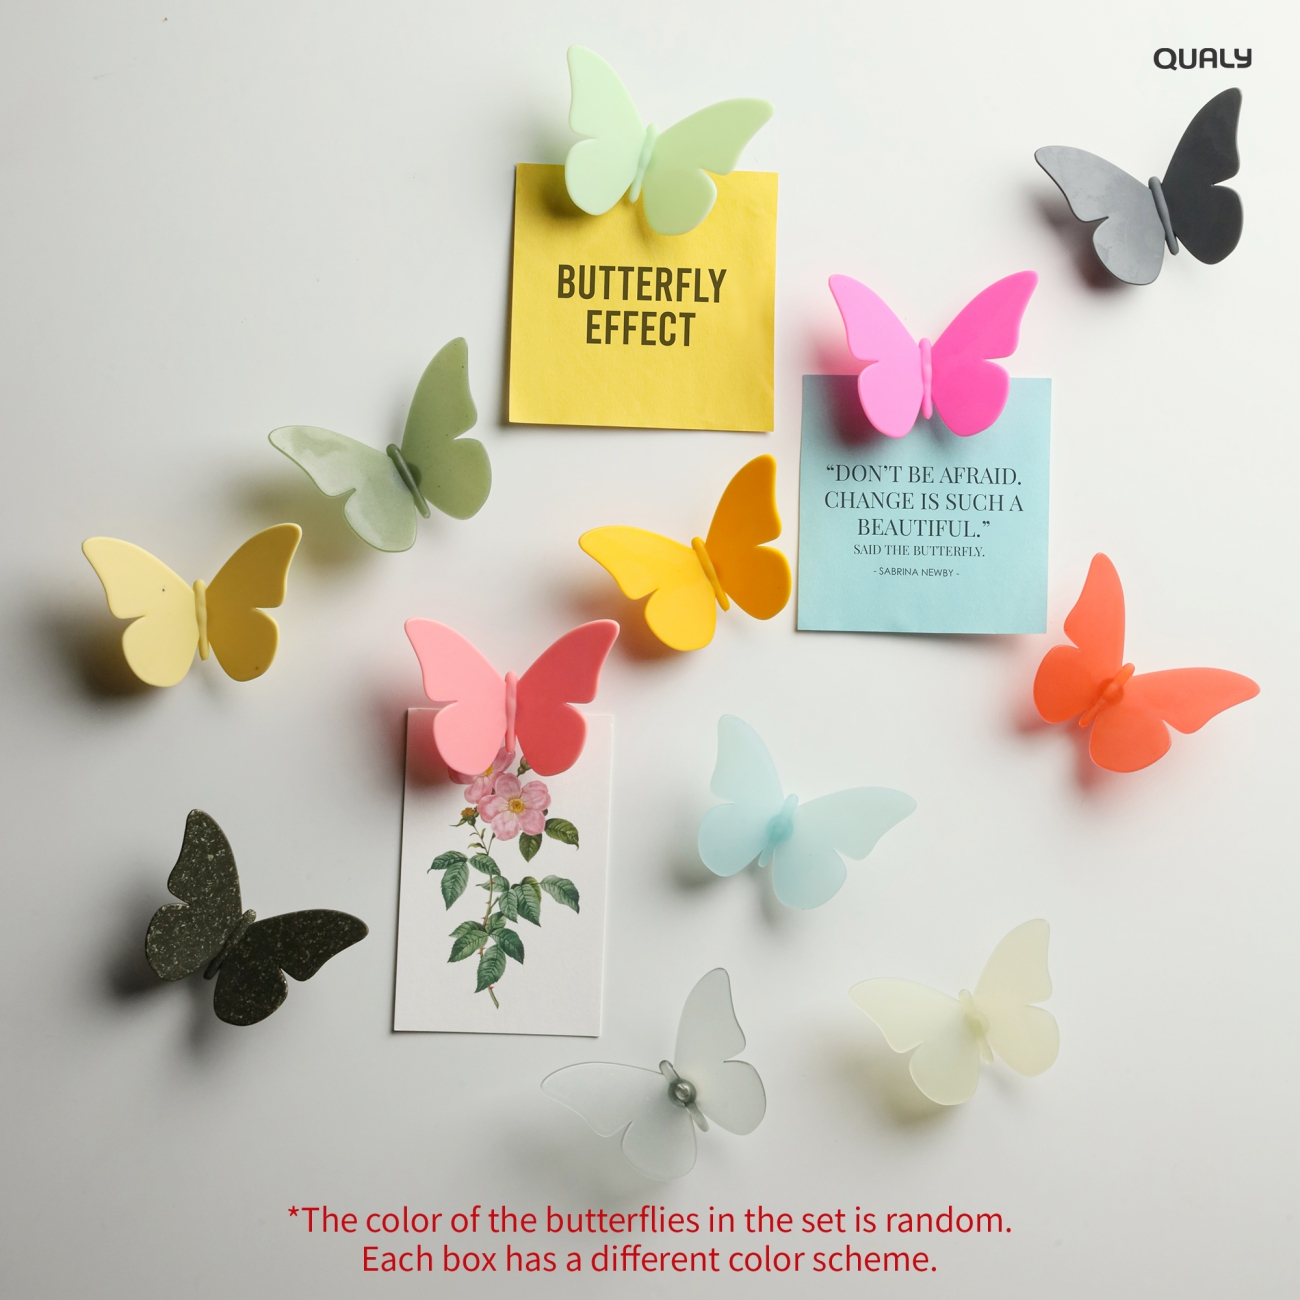 BUTTERFLY  MAGNET _Mixed